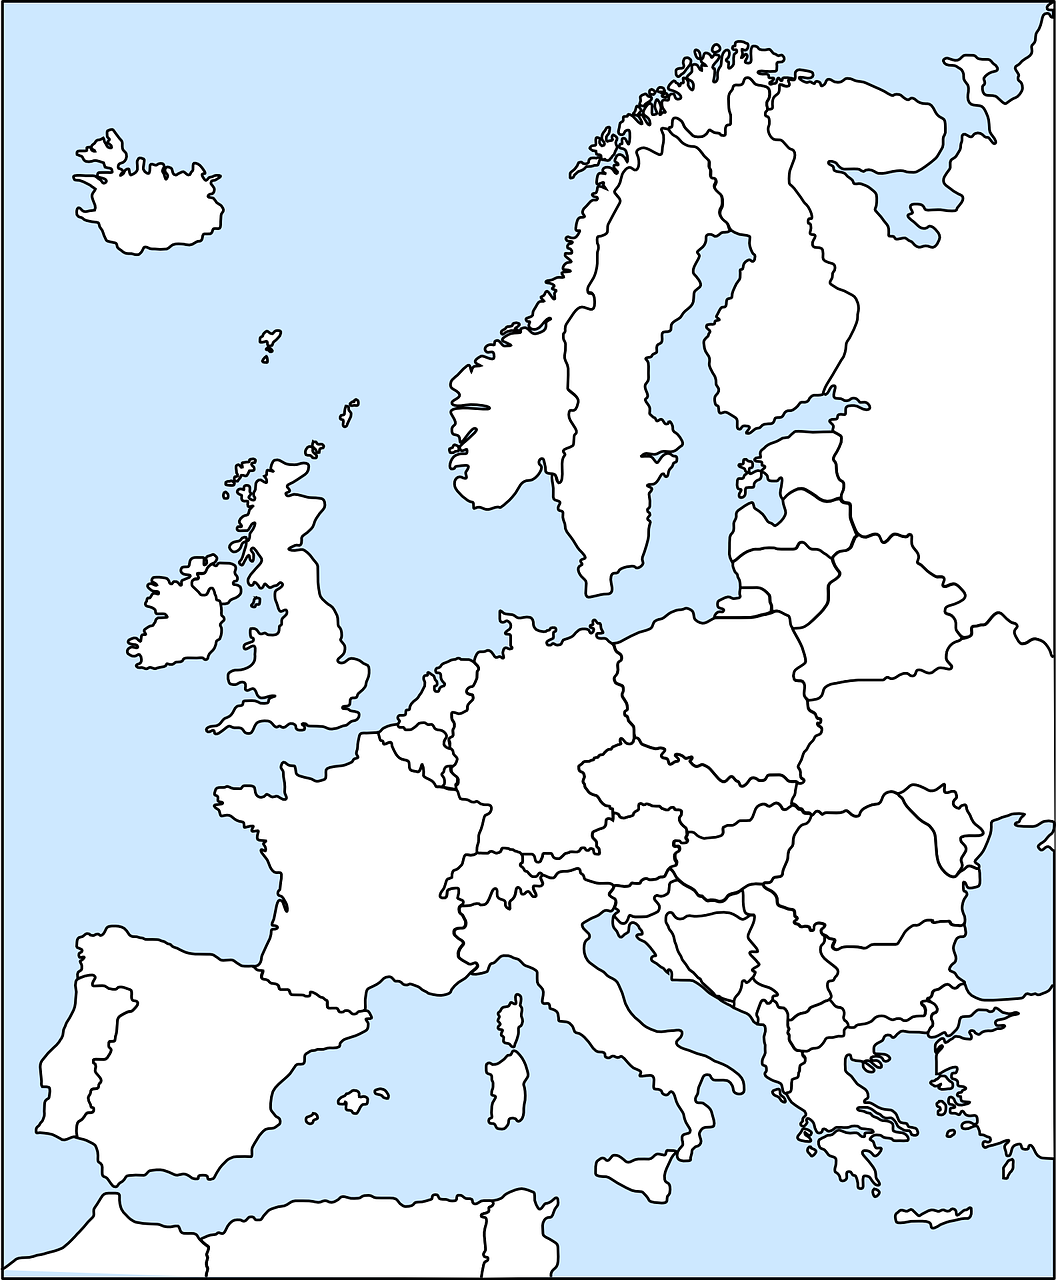 White on blue map of Europe